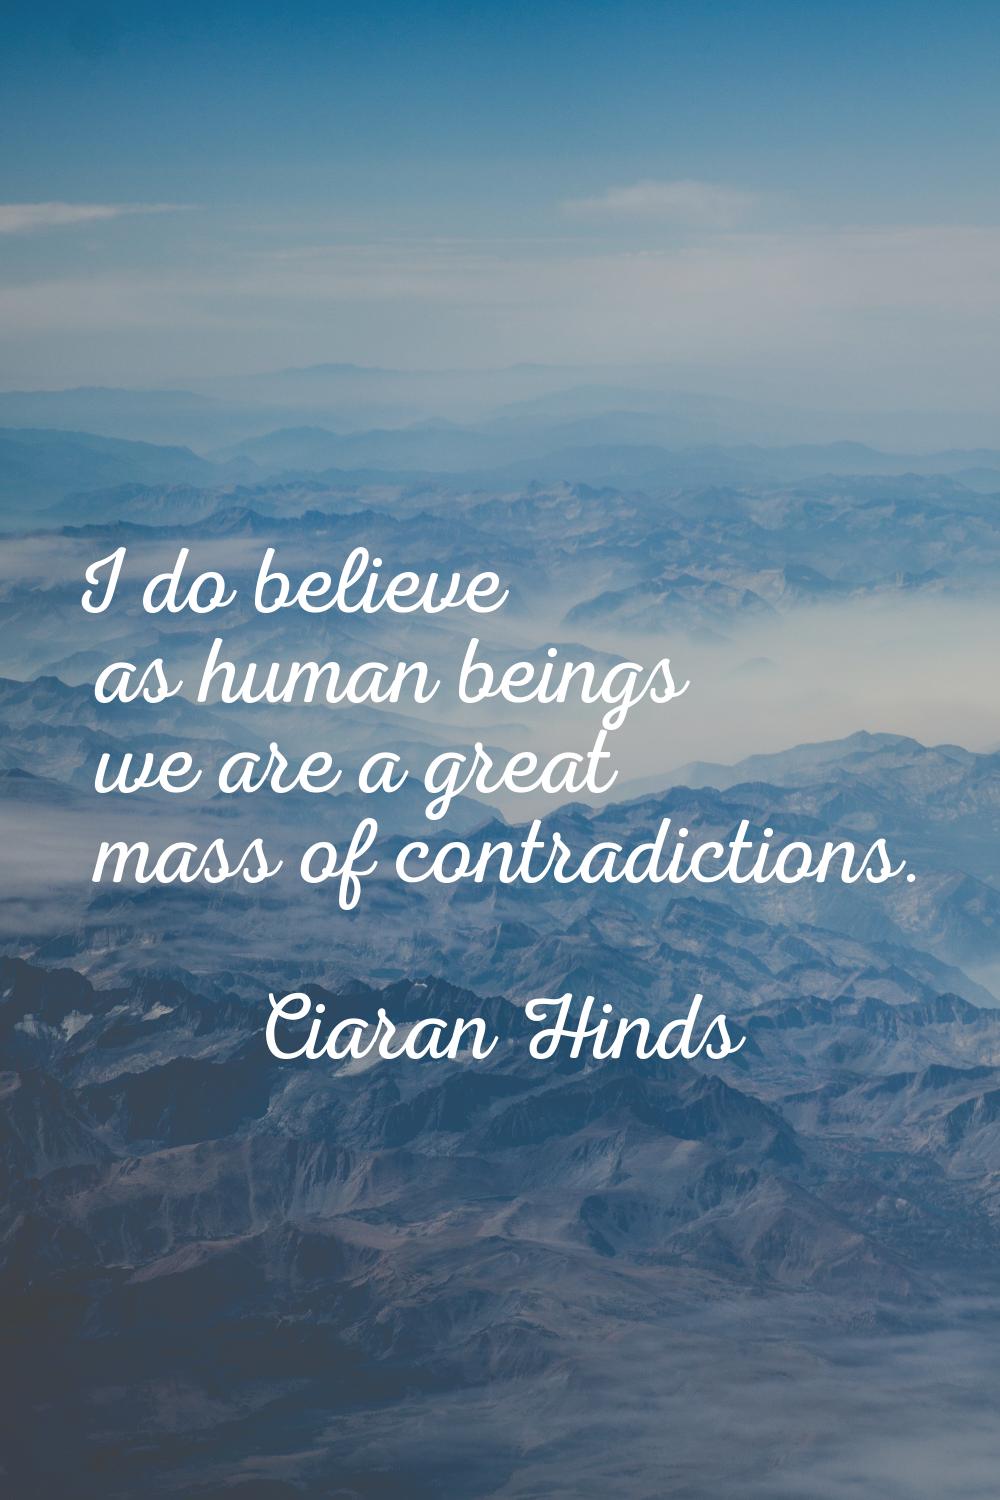 I do believe as human beings we are a great mass of contradictions.